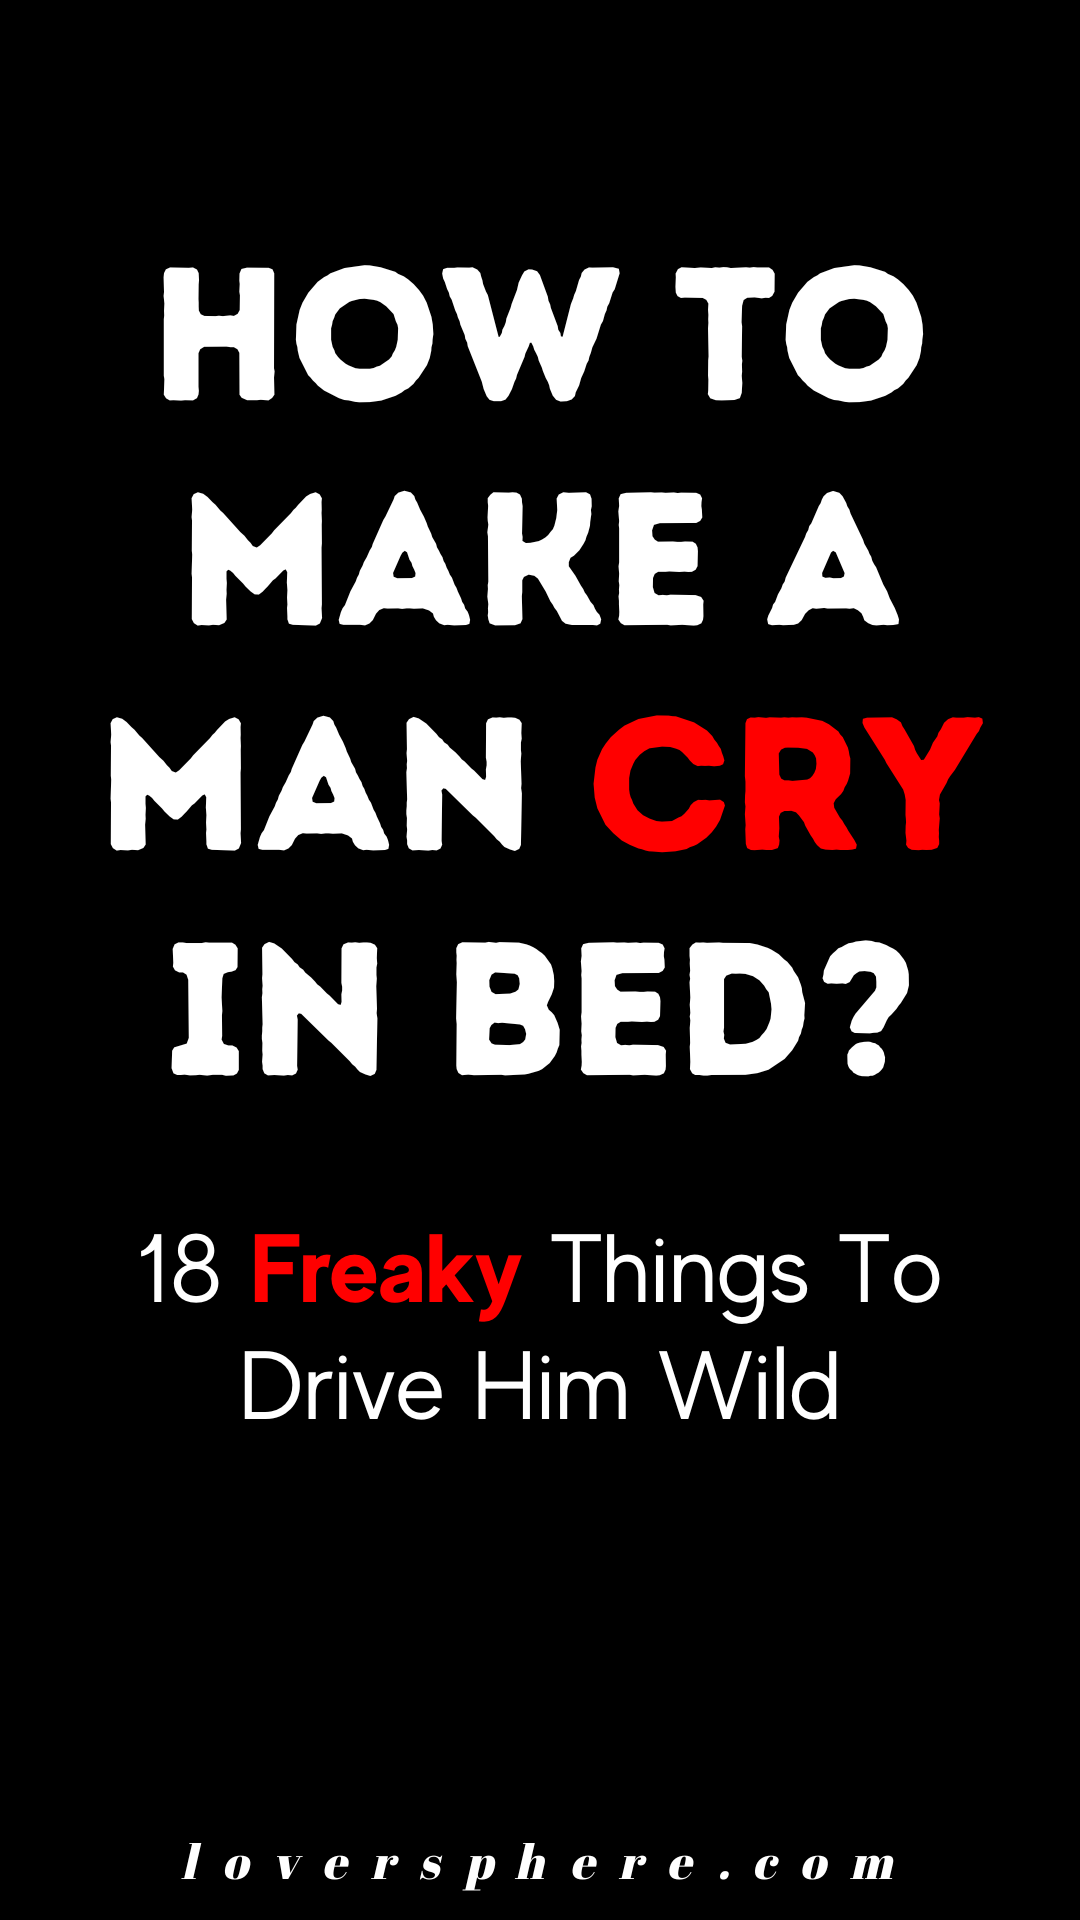 how to make a man cry in bed